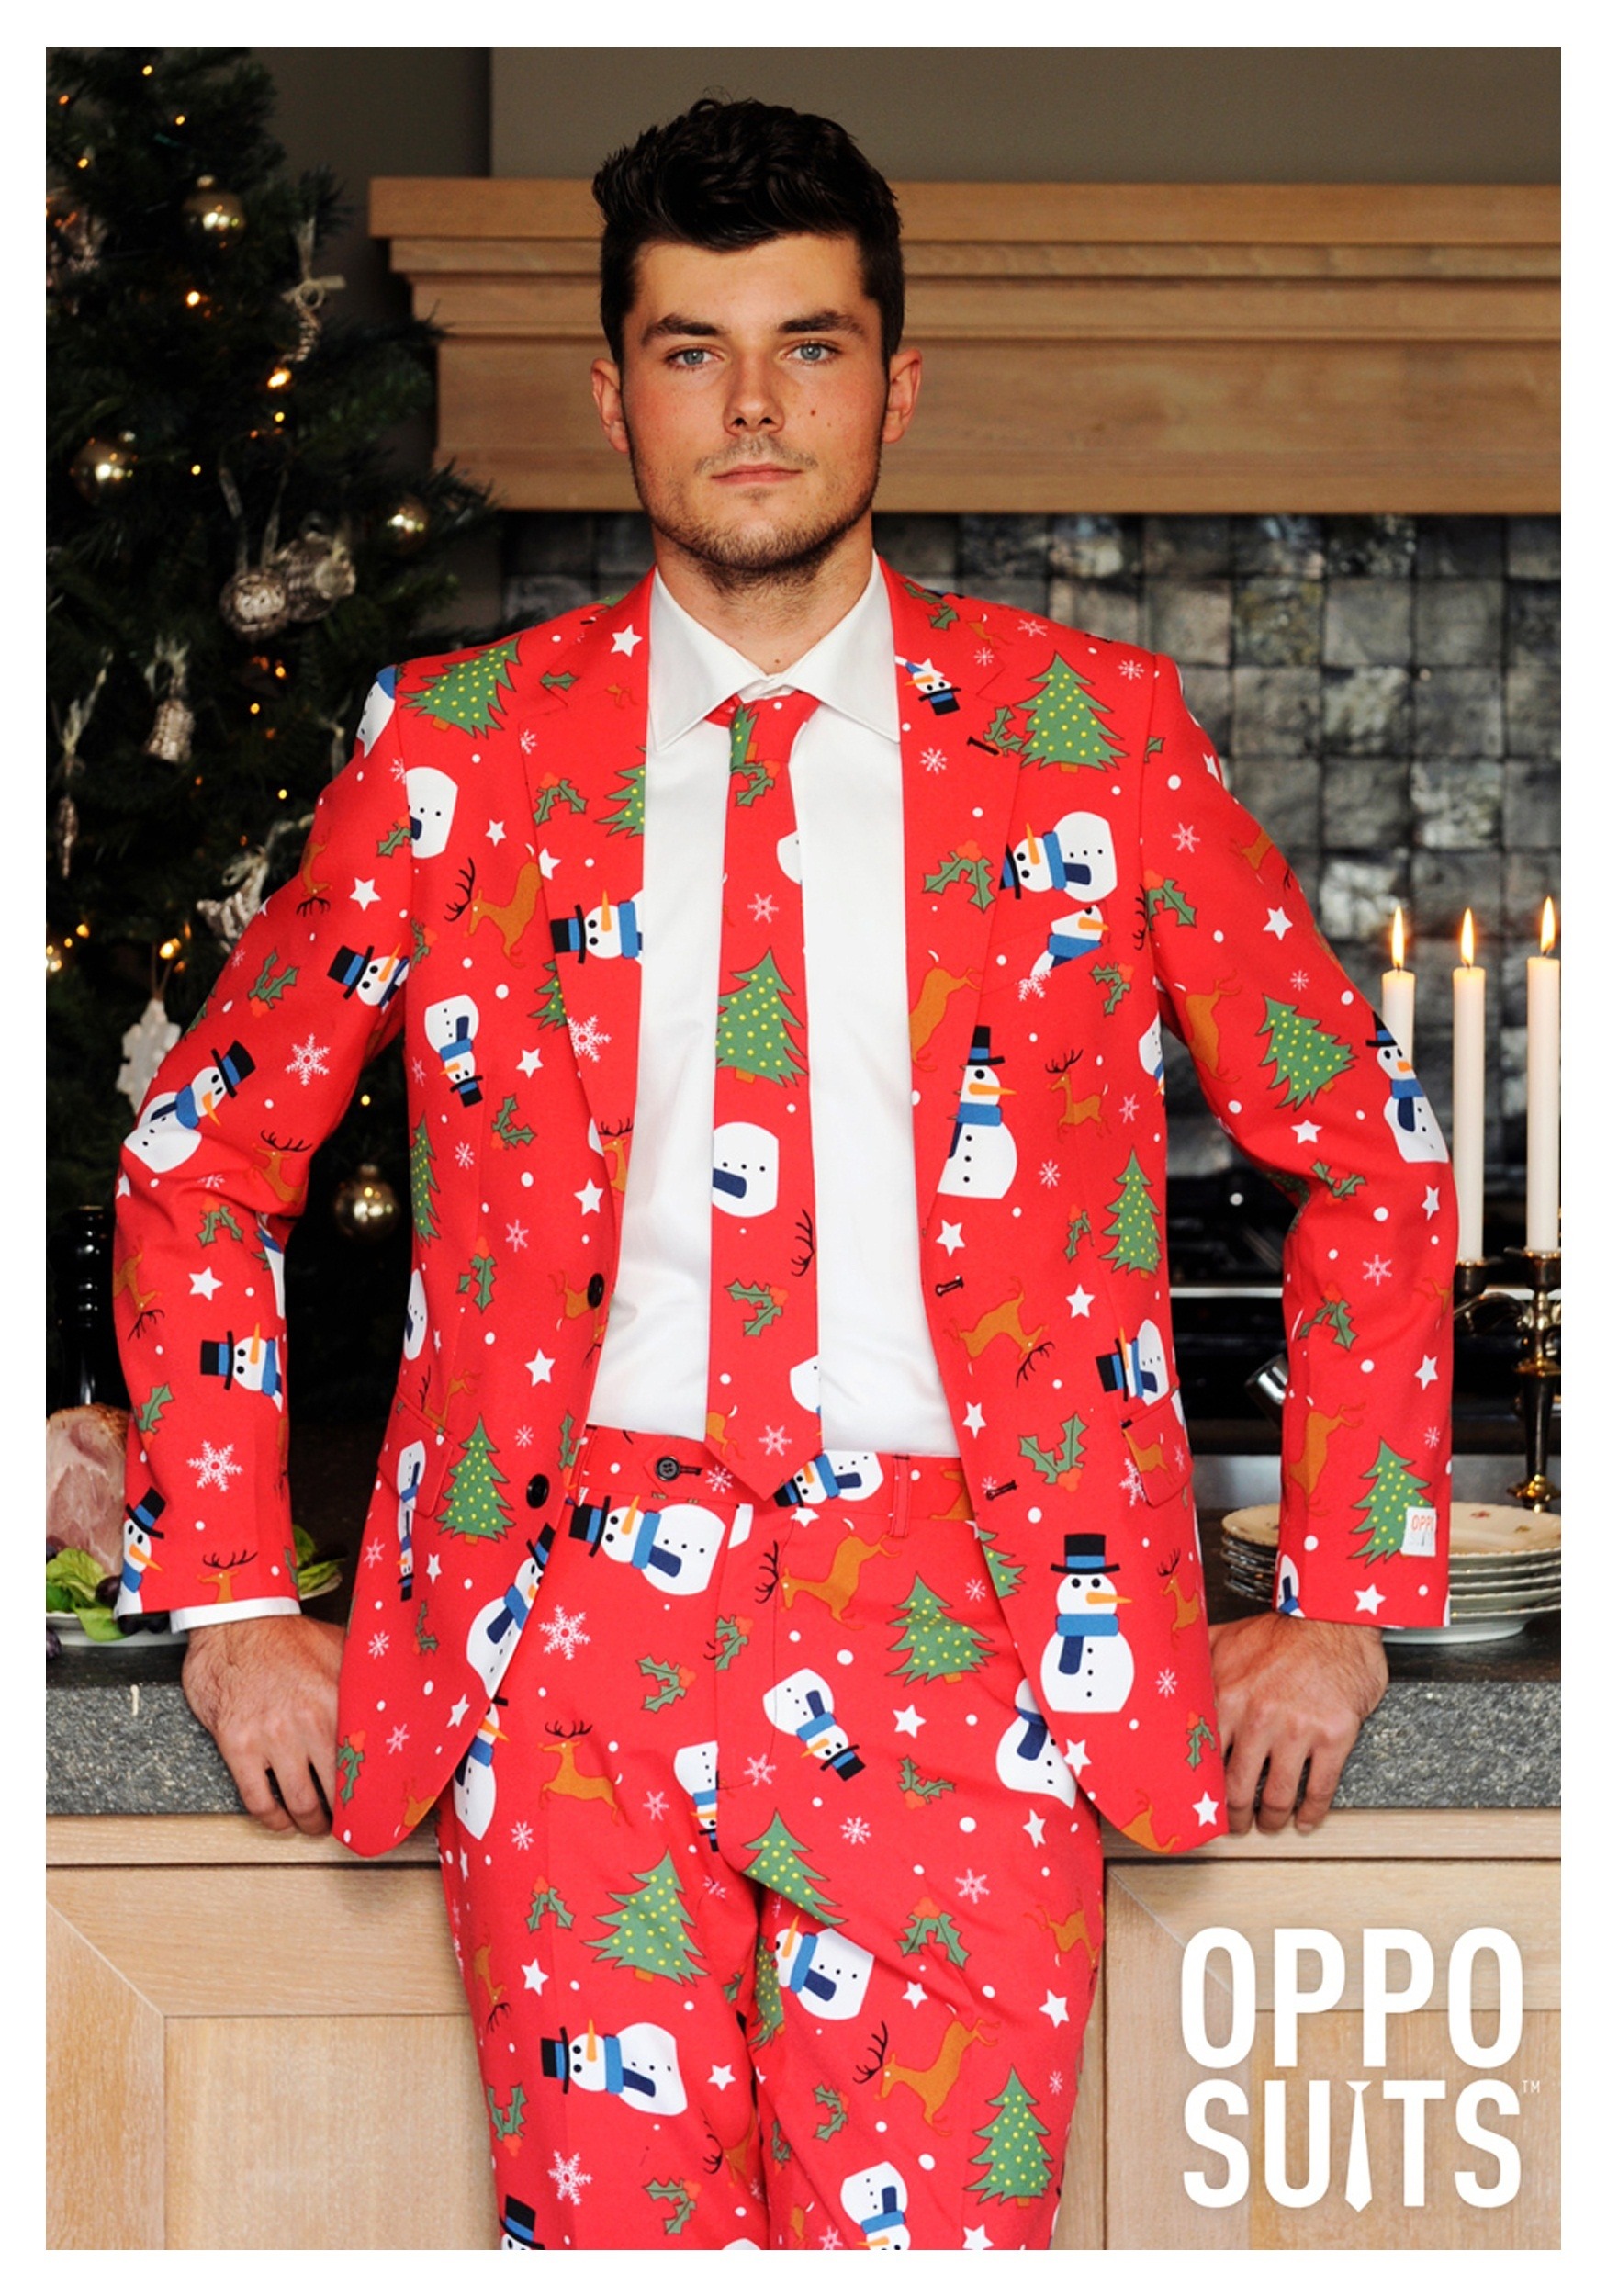 Men’s OppoSuits Red Christmas Costume Suit